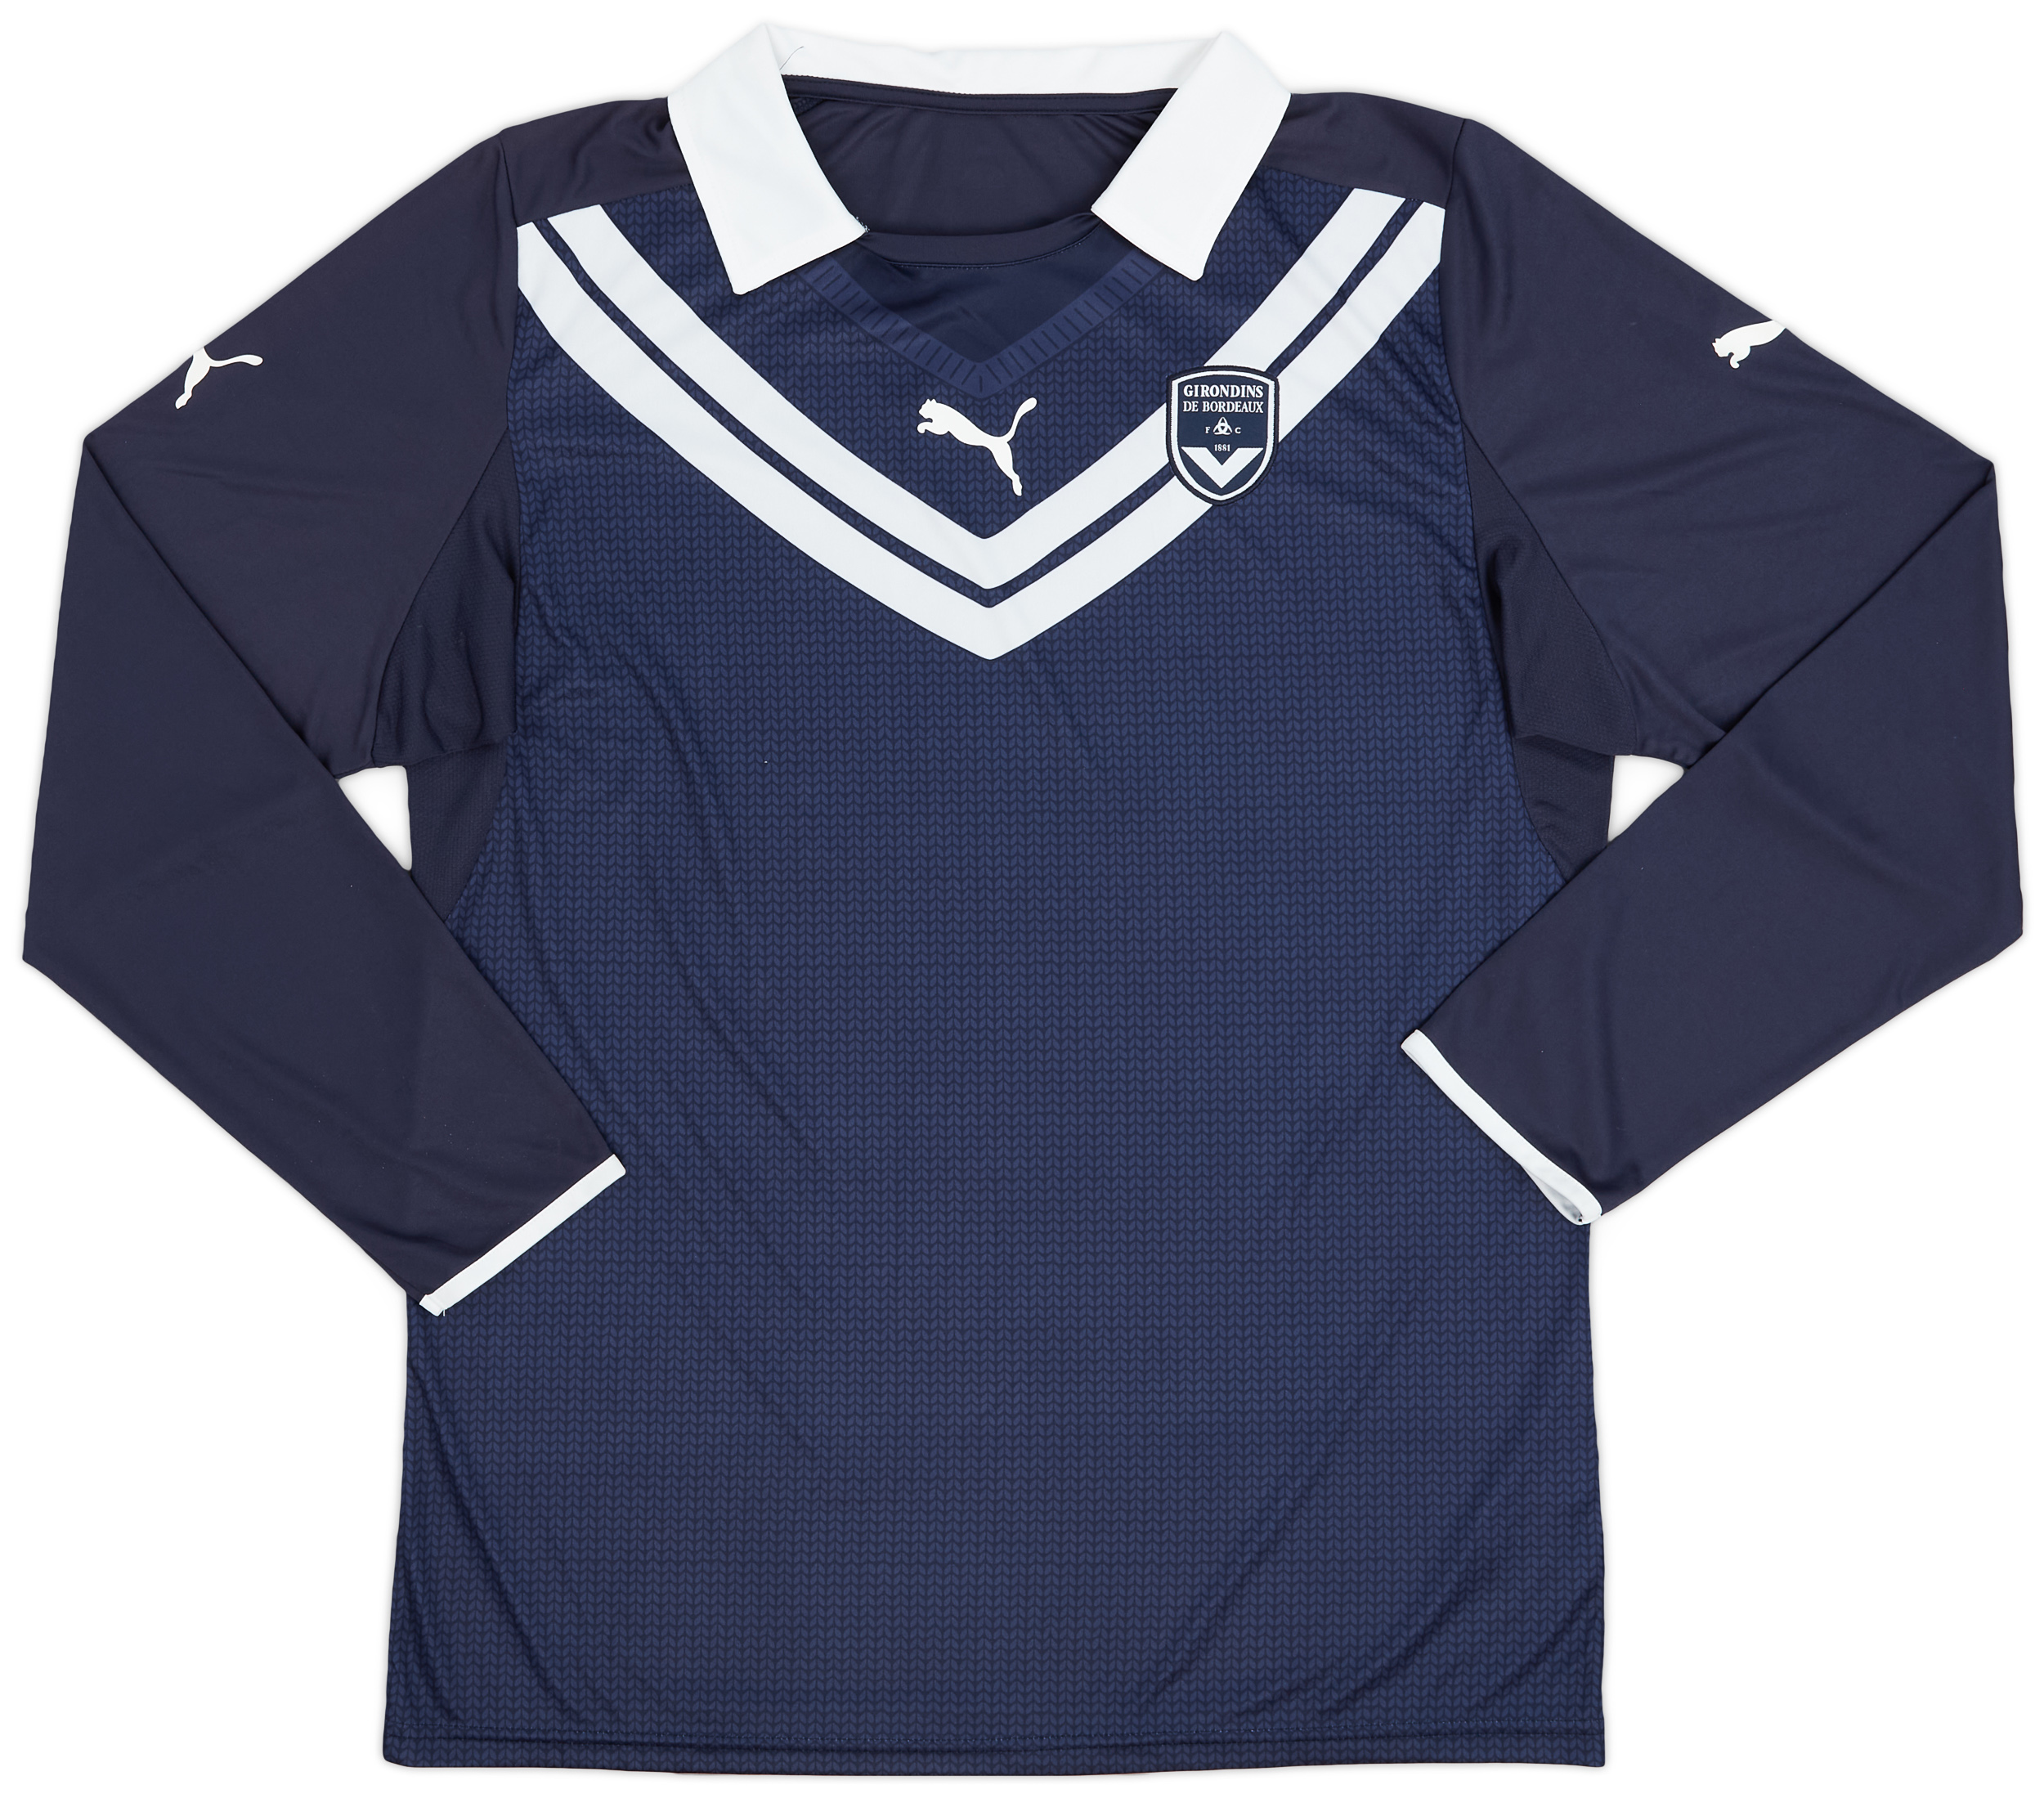 2012-13 Bordeaux Player Issue Home Shirt - 9/10 - ()